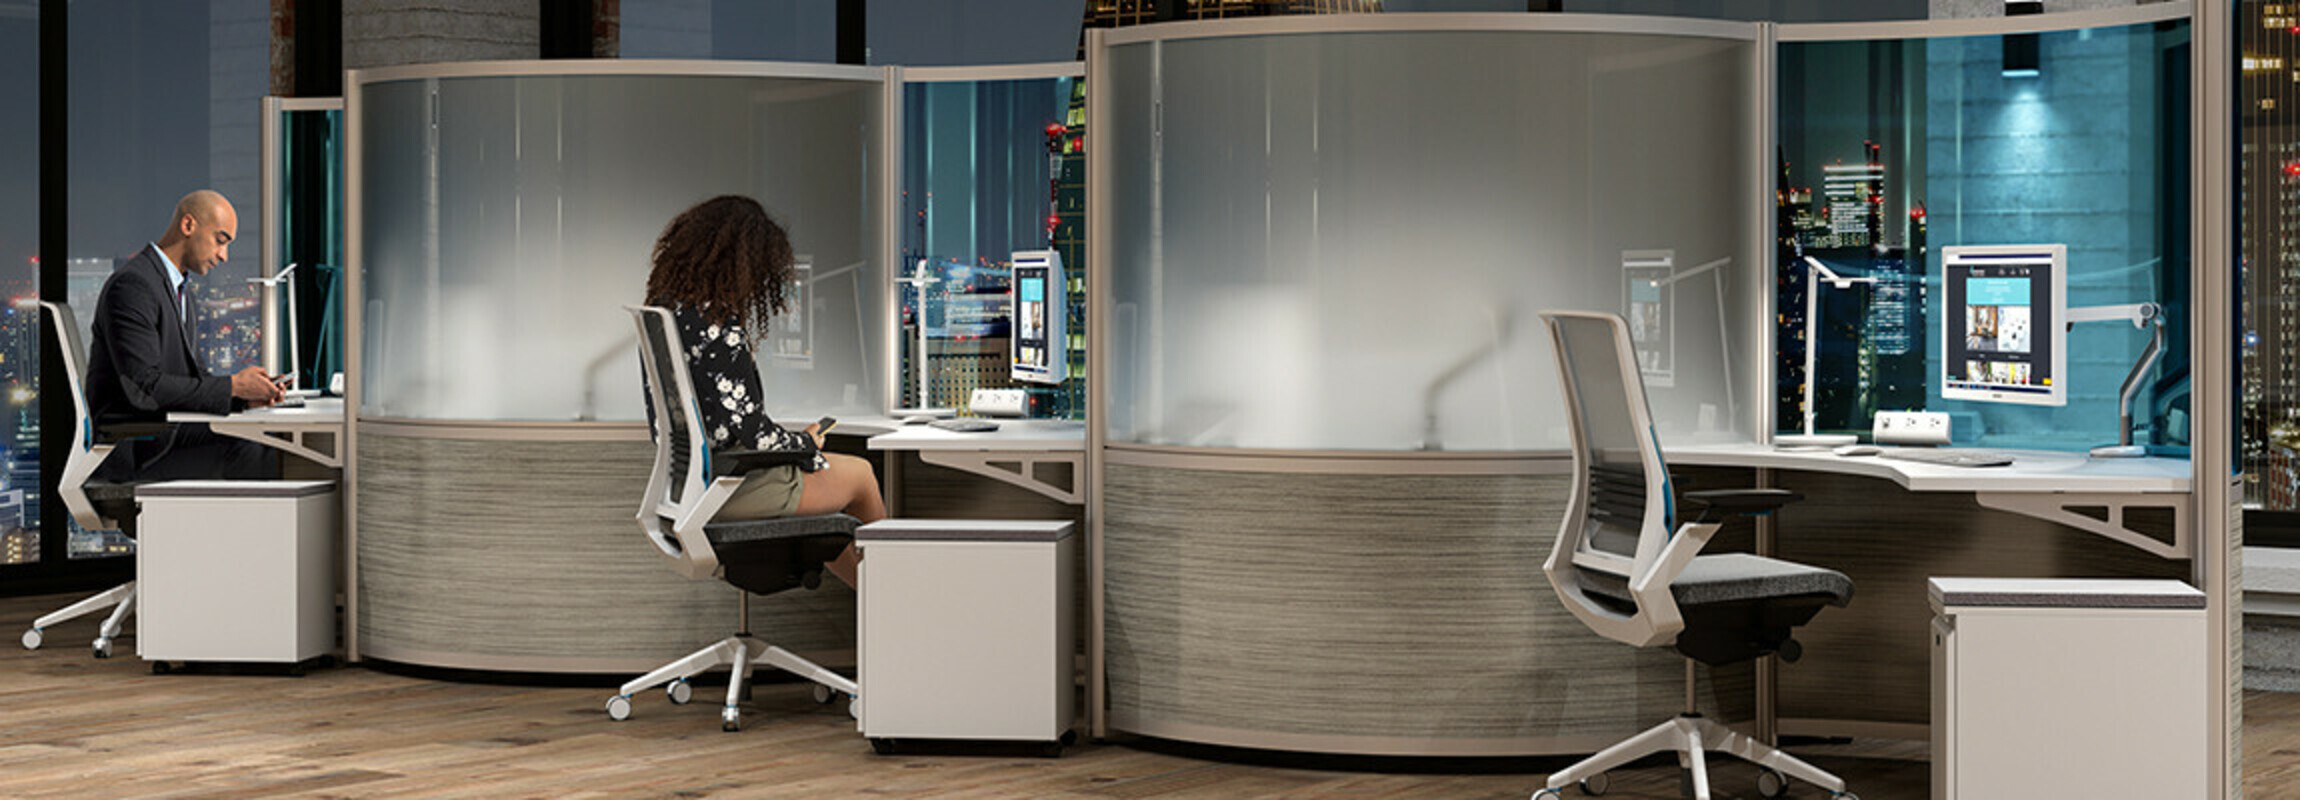 How Does Office Furniture Add Value To A Workspace